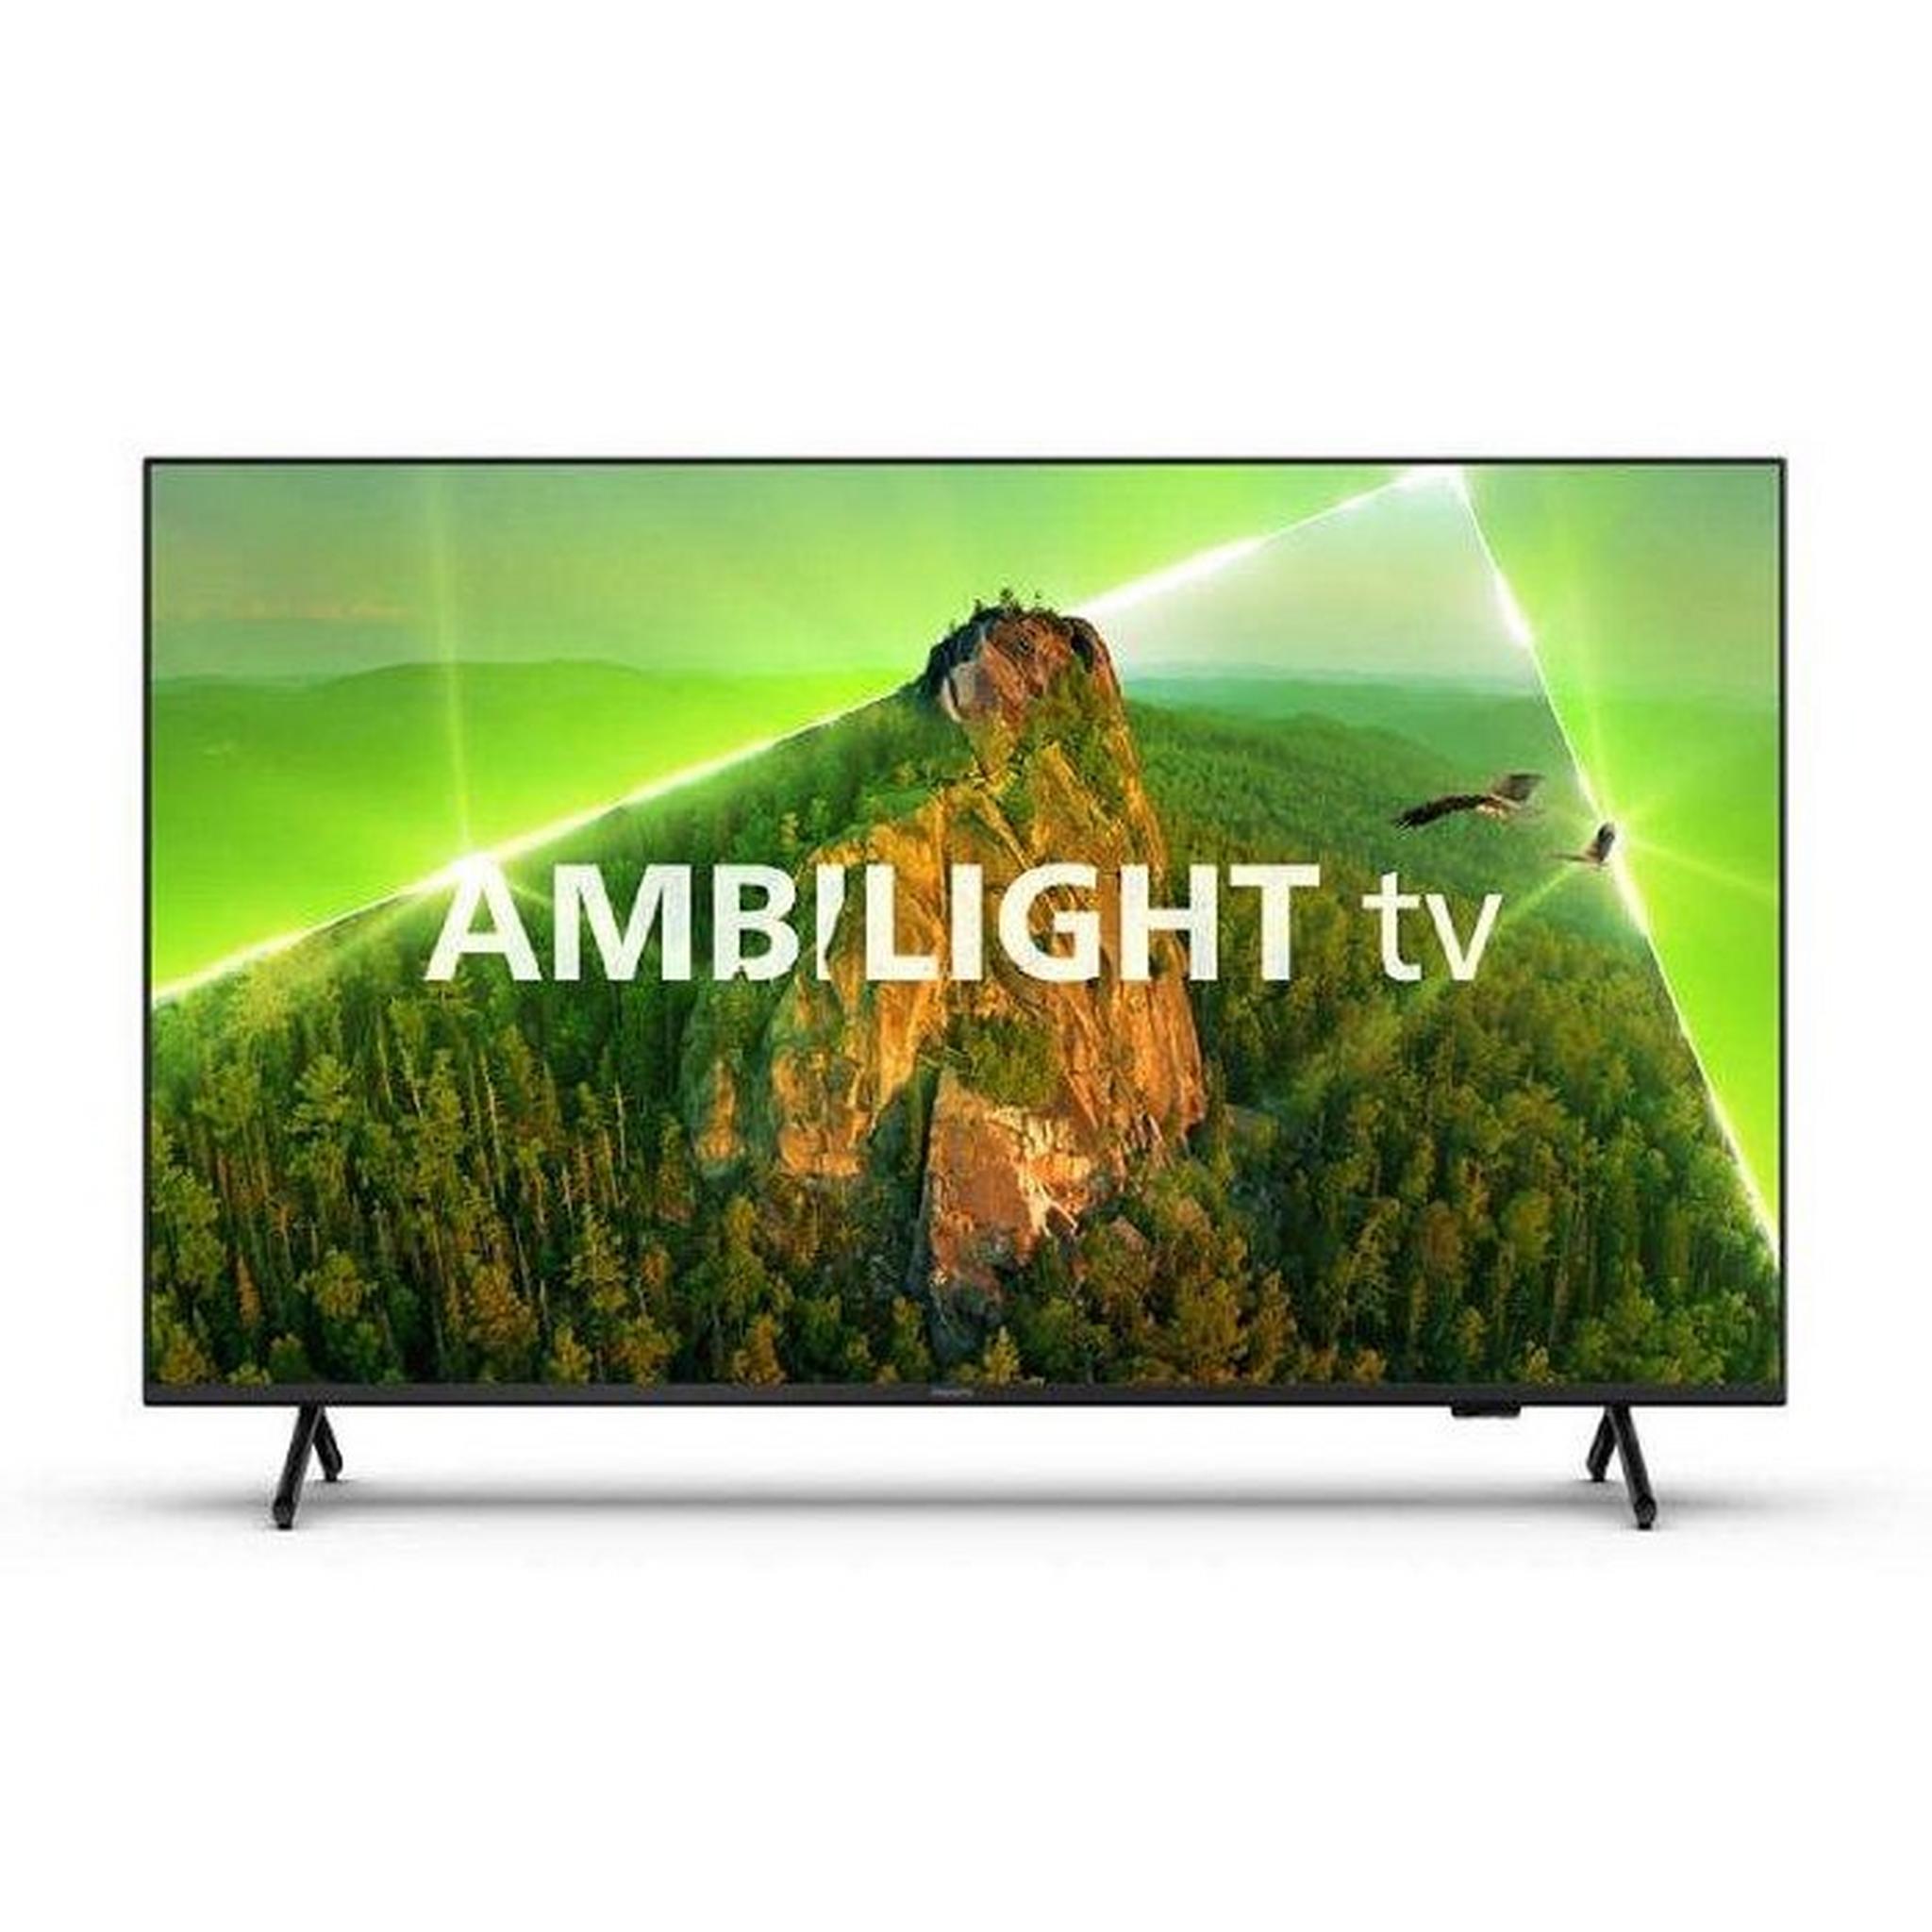 PHILIPS 50-inch 4K UHD LED Ambilight Smart Android TV, 50PUT7908/56 – Black